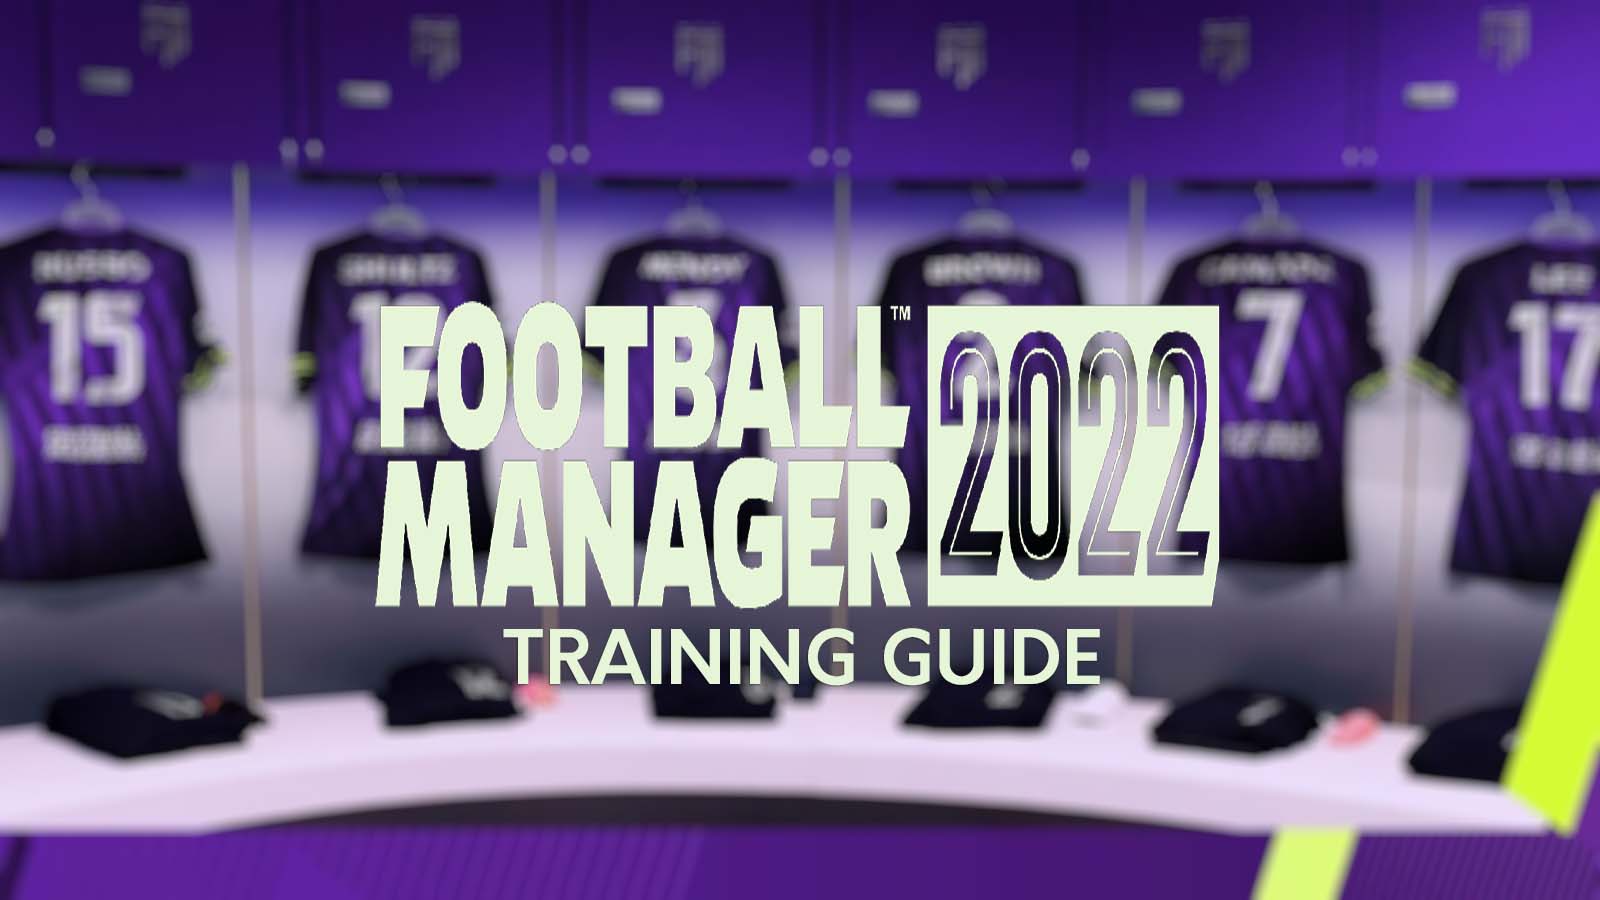 Football Manager 2022 training guide